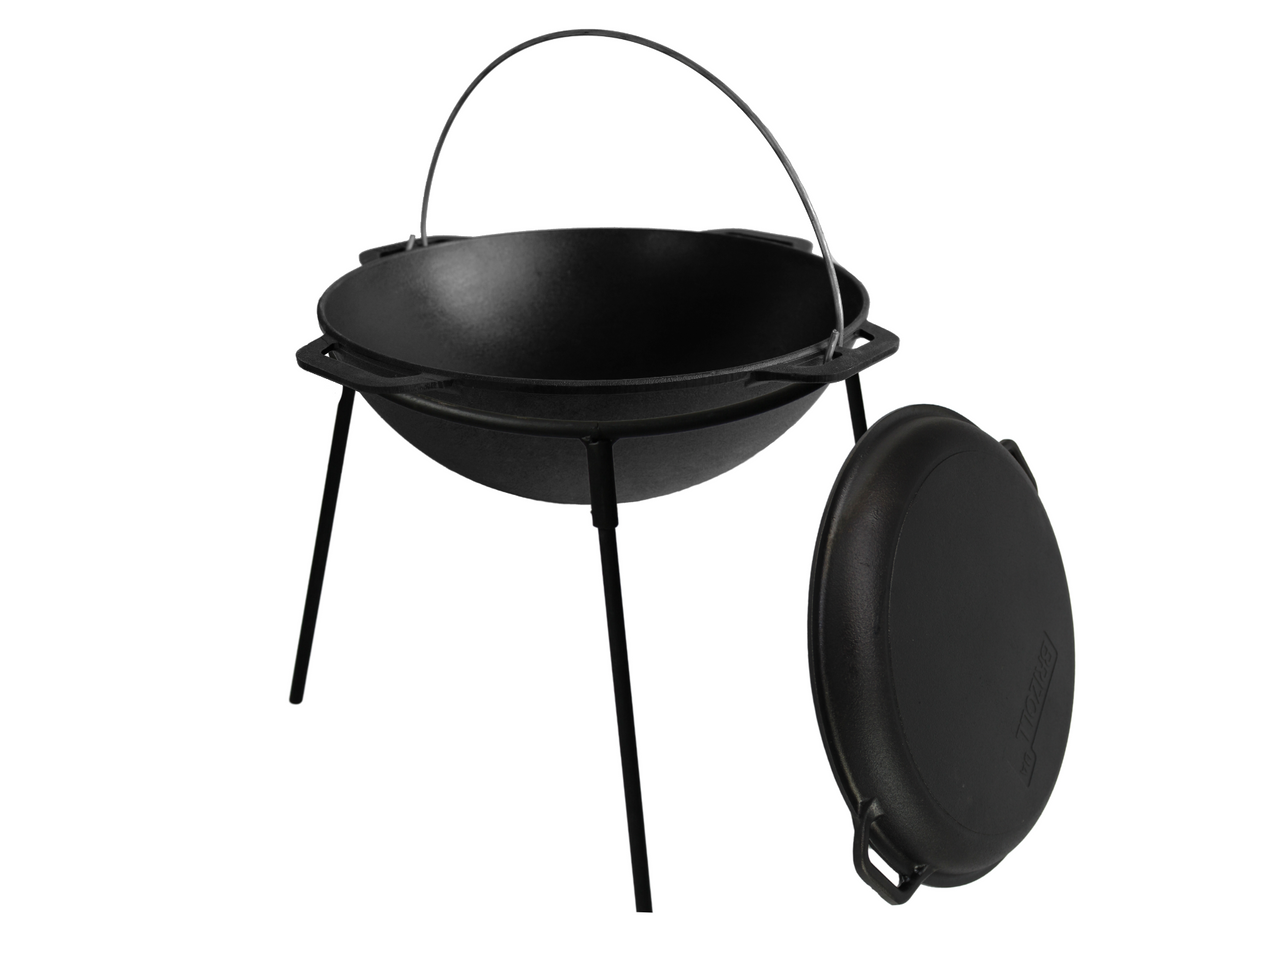 Cast iron asian cauldron 10 L WITH A GRILL LID-FRYING PAN and a stand